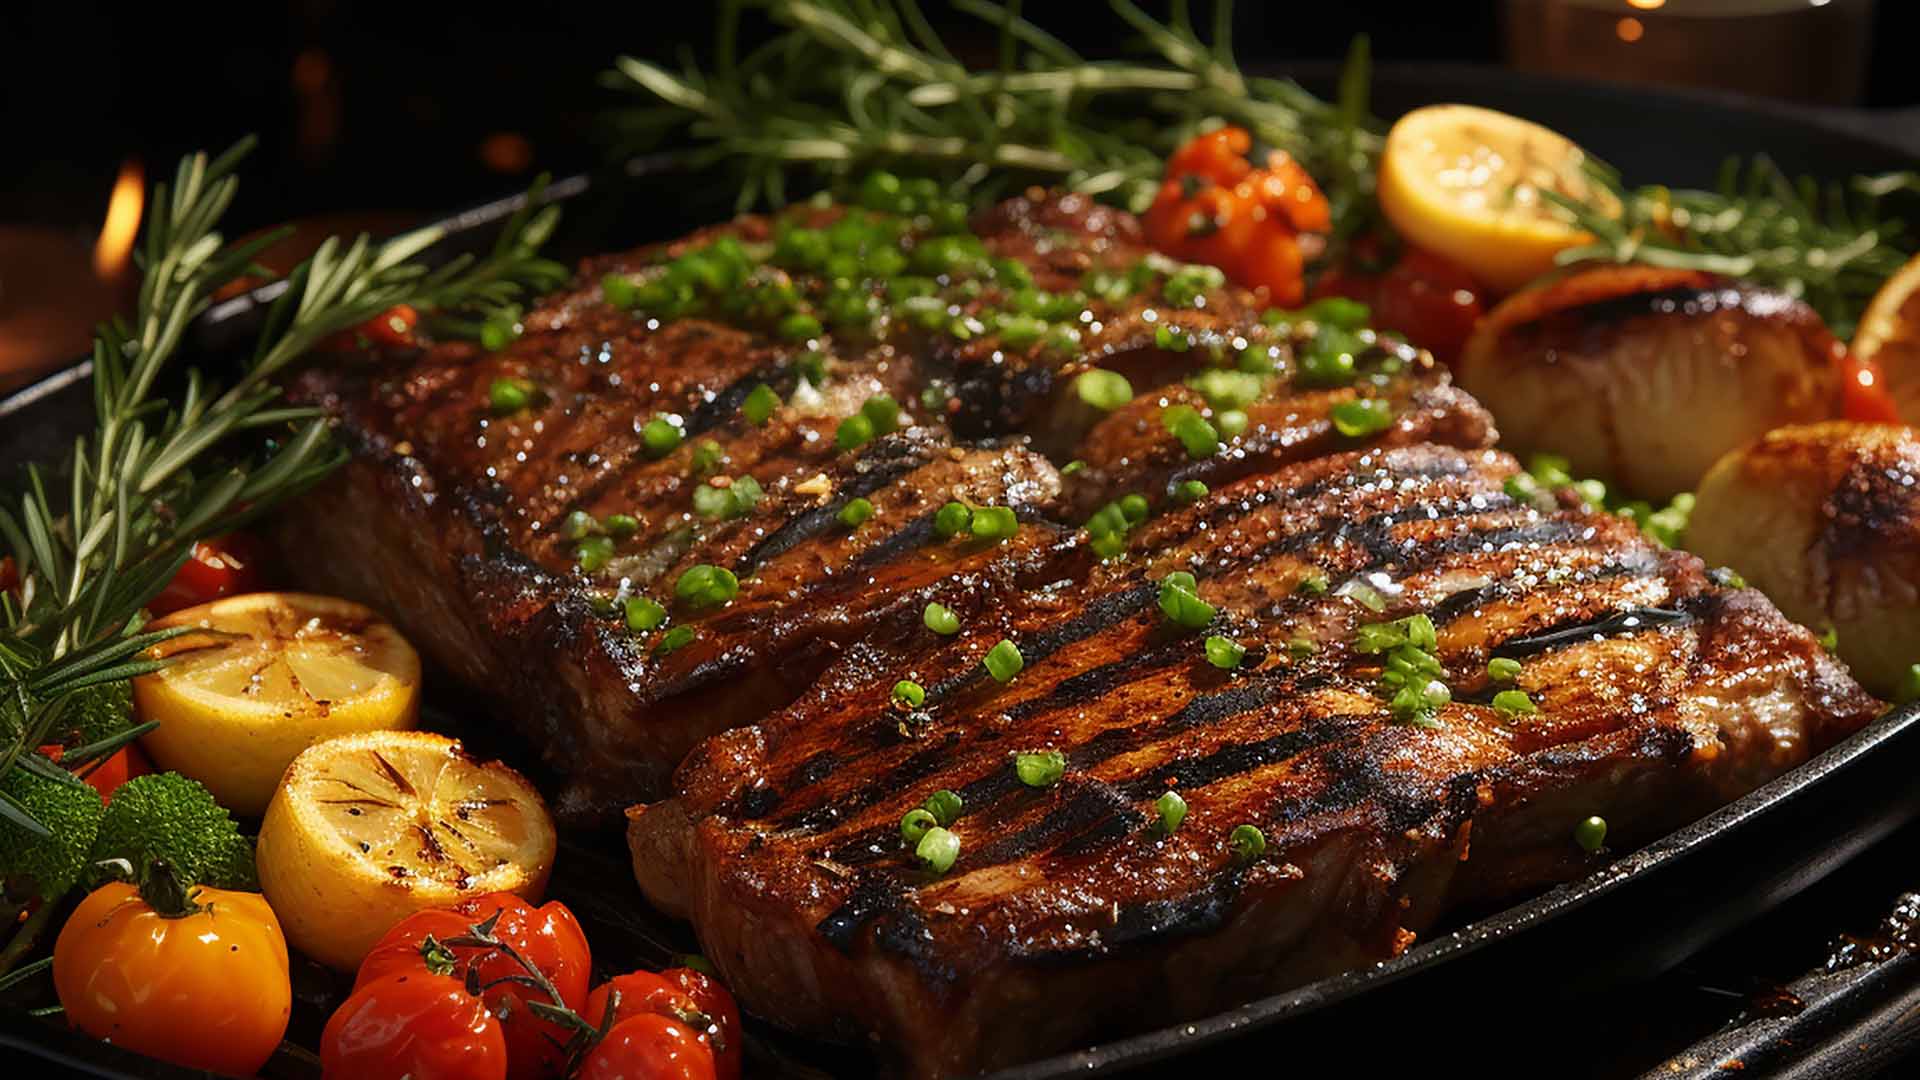 Beautifull Cooked Steaks with Vegetables